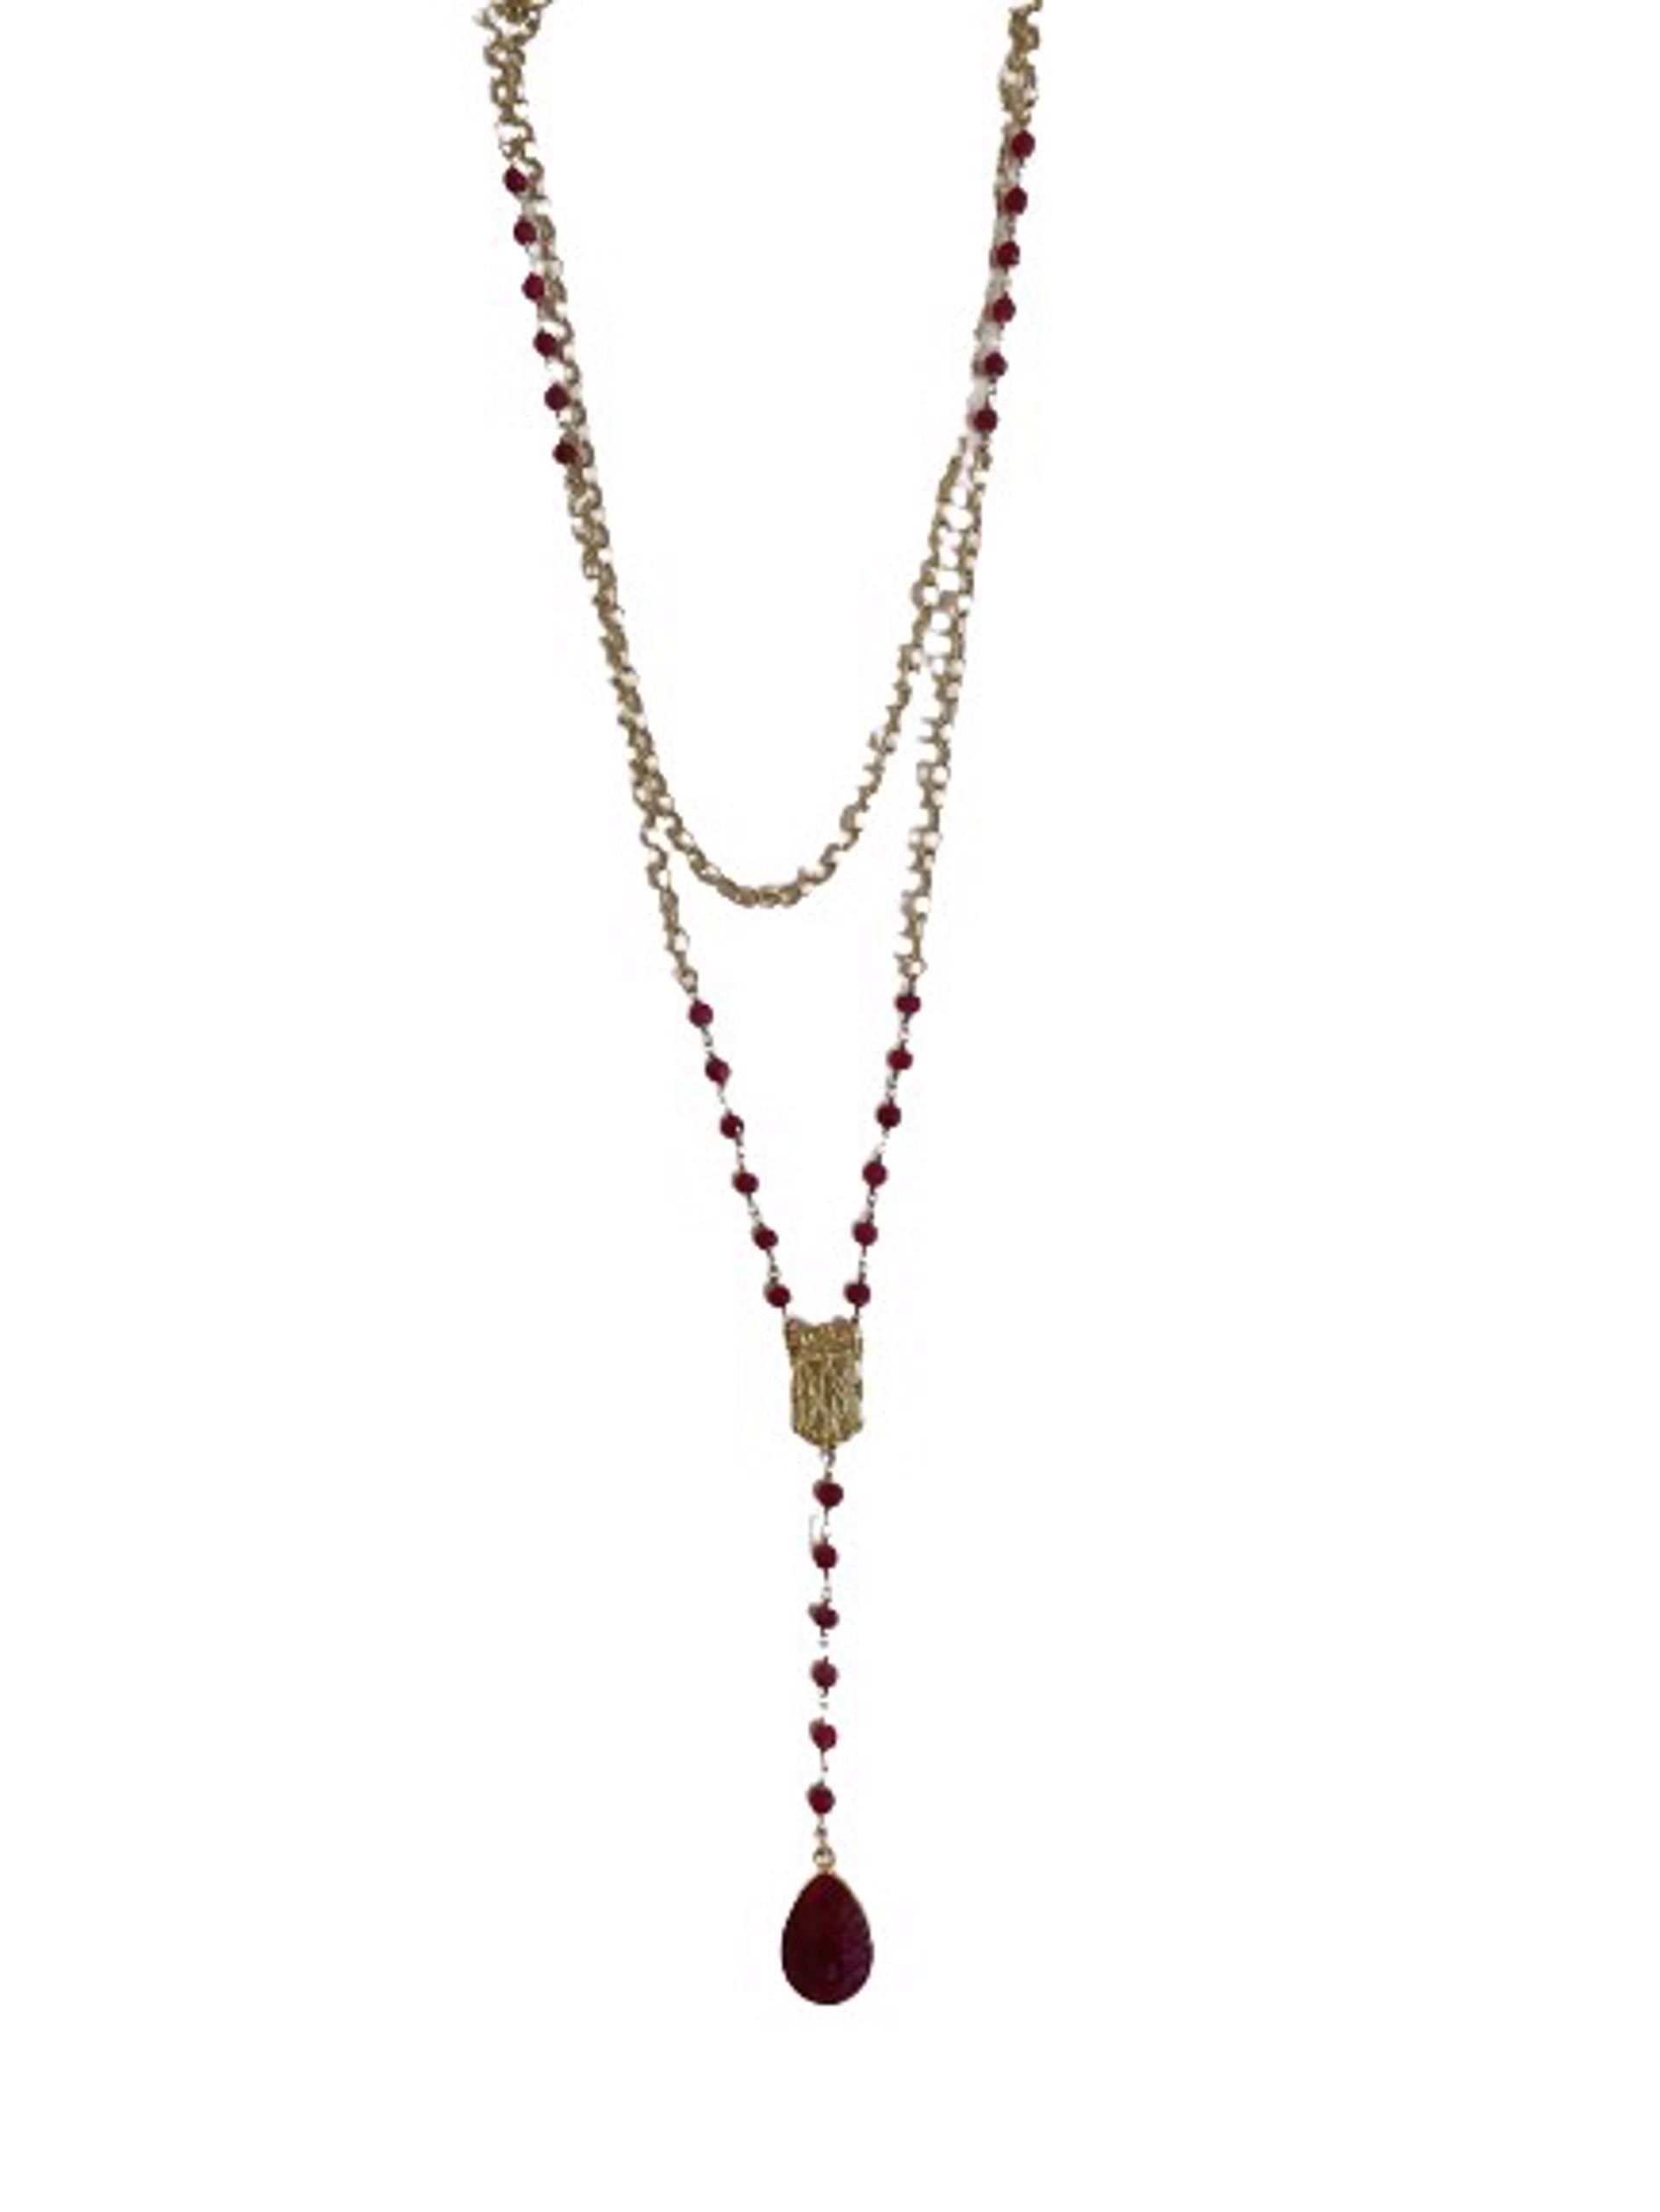 Gold Vermeil and Garnet Long Necklace with Crown Connector and Small Garnet Teardrop Pendant by Karen Birchmier